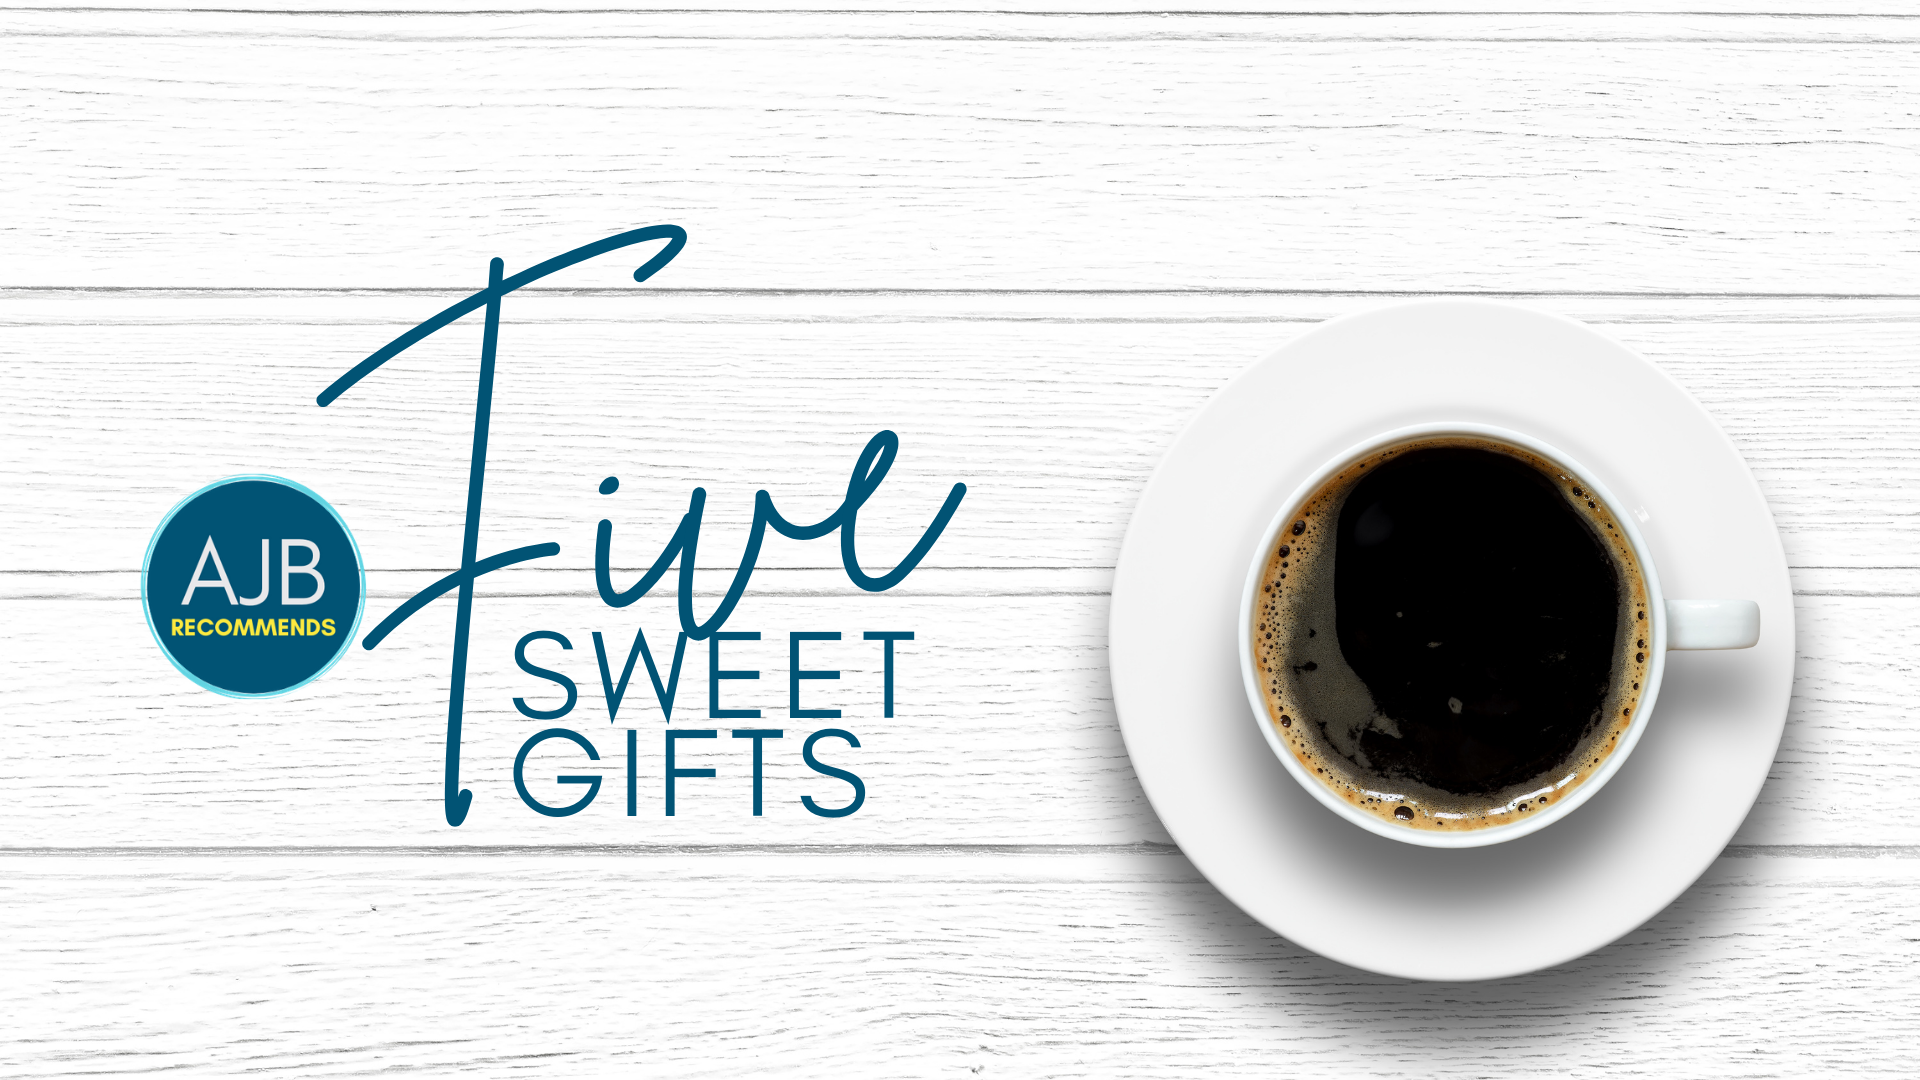 AJB Recommends five sweet gifts text overlay on a picture of a white cup with coffee on a white plank surface